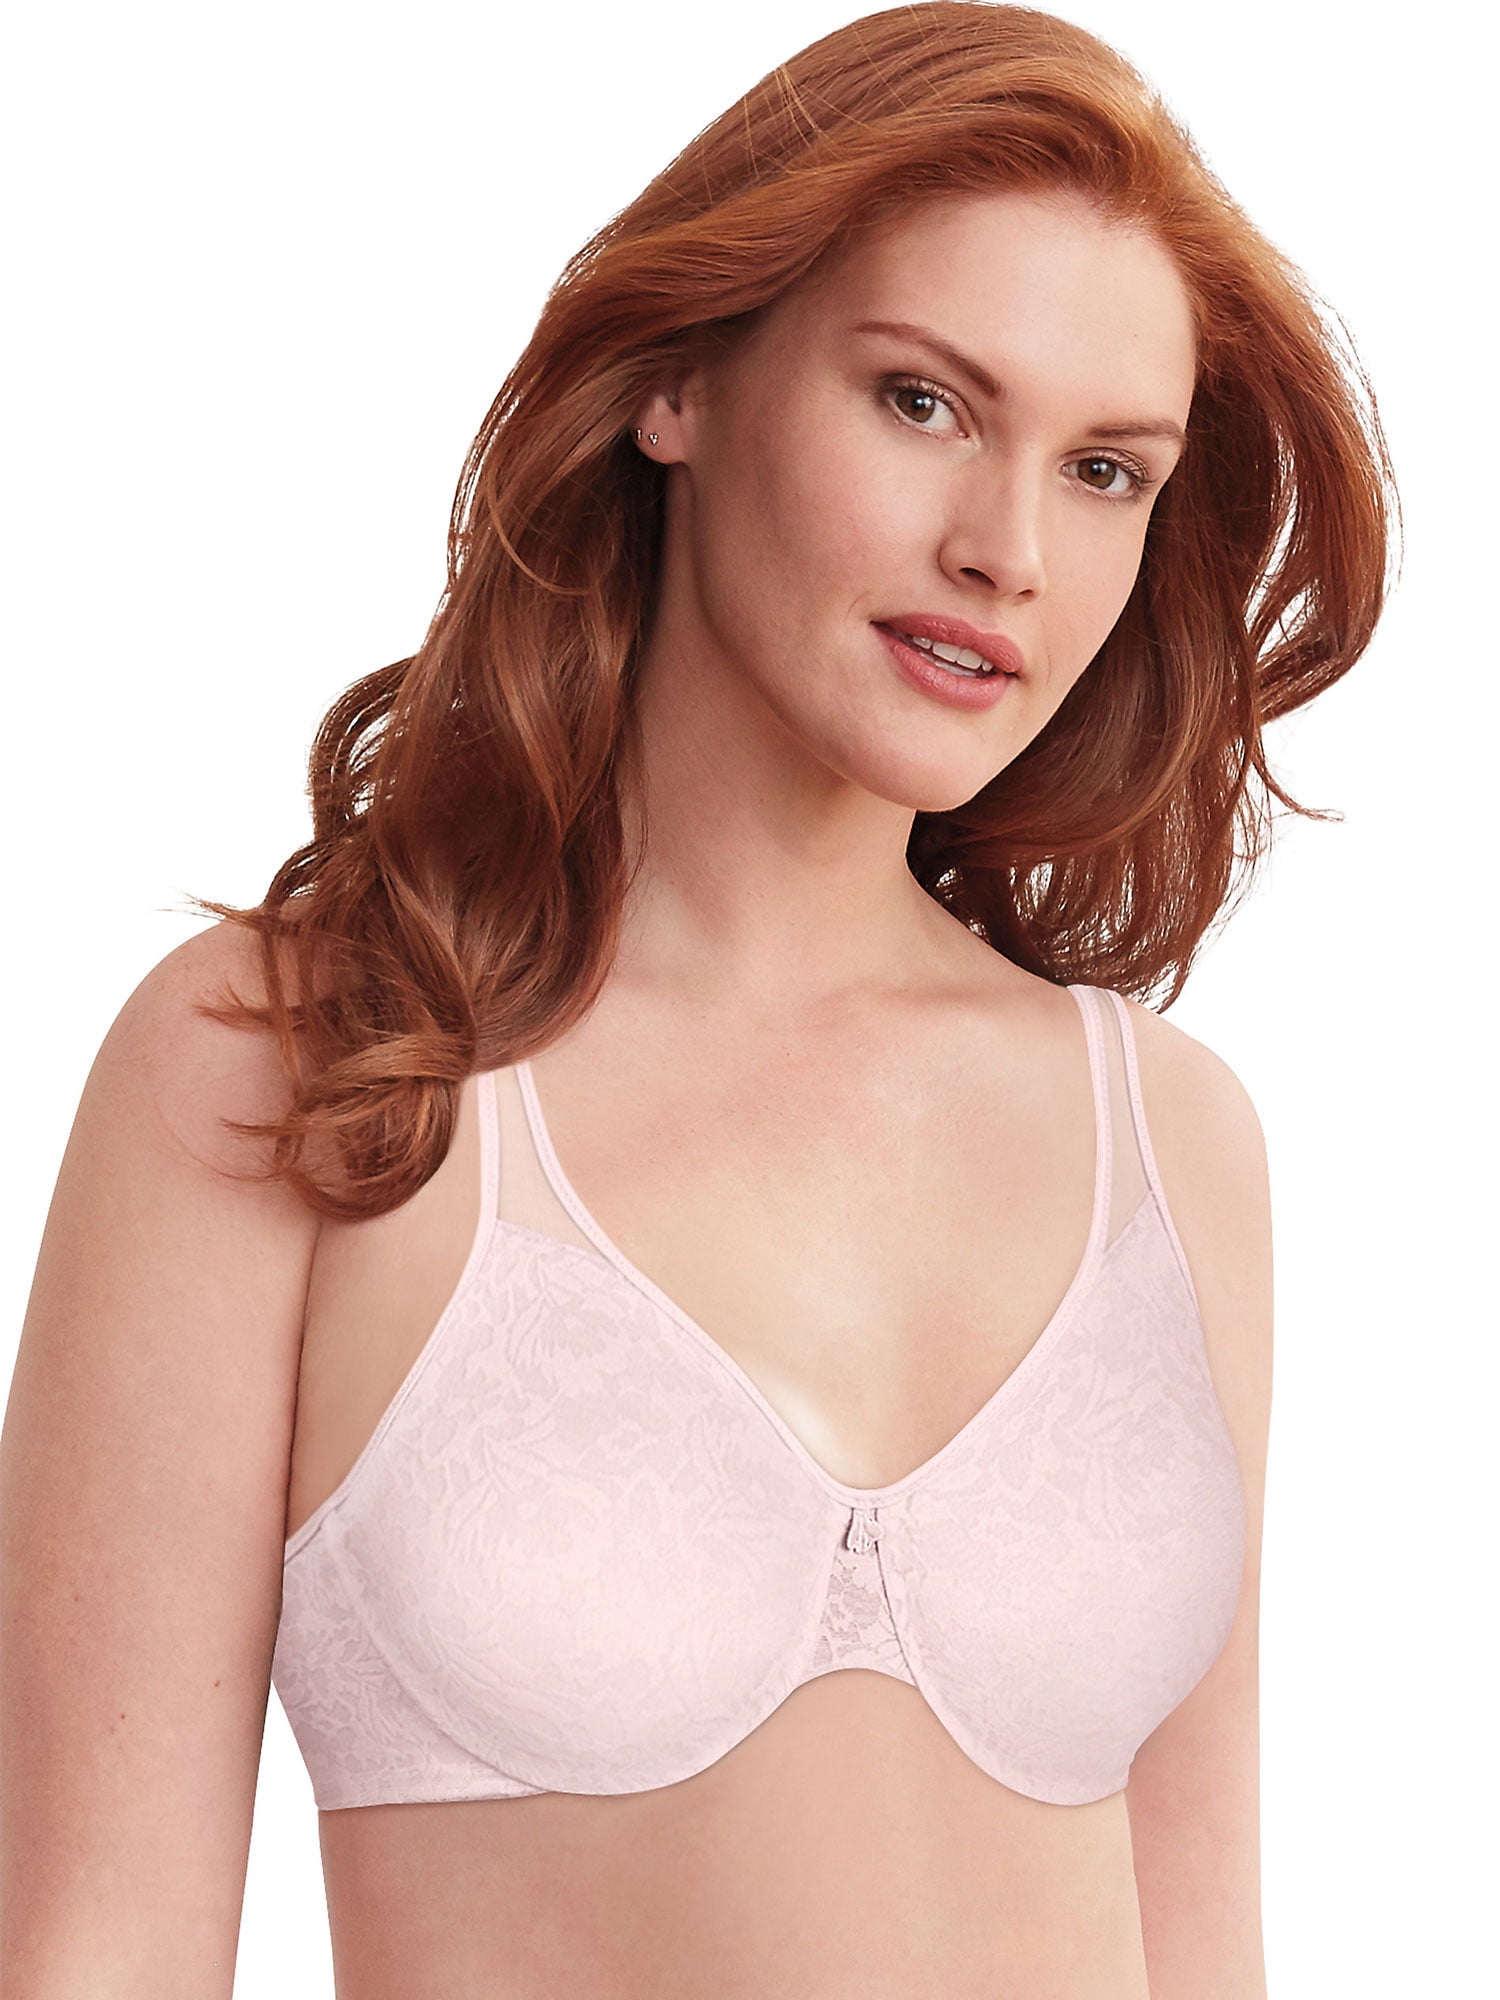 Bali Bras on Instagram: A must-have minimizer for sweater weather!